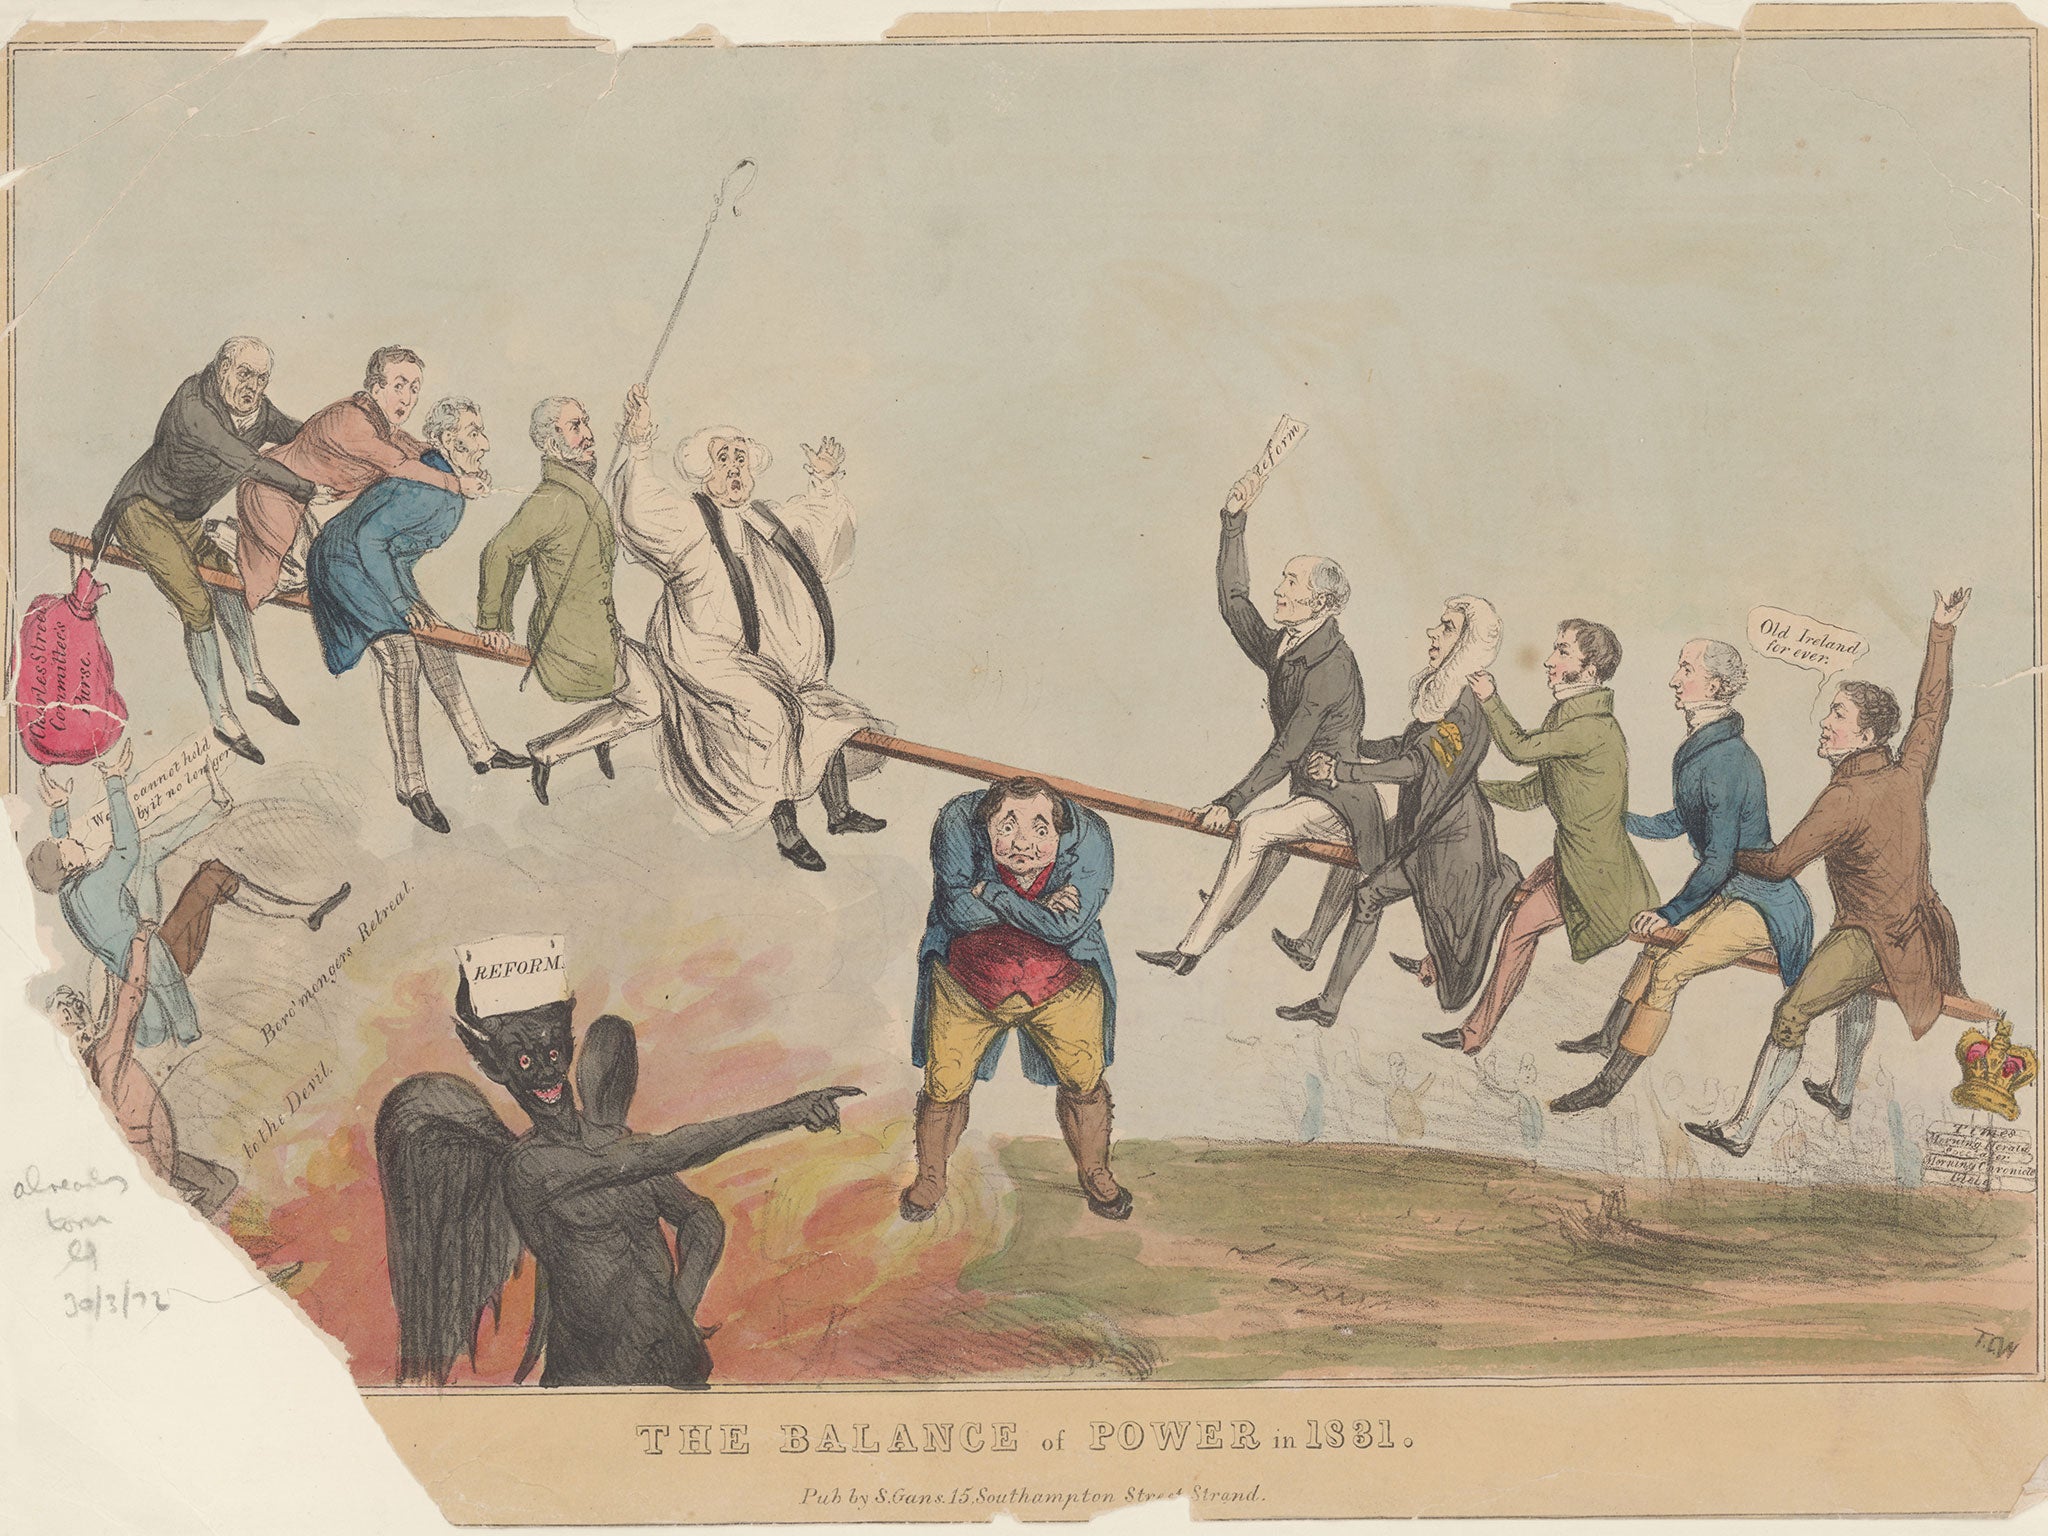 A cartoon depicts the the Reform Act of 1831. John Bull supports a political see-saw with the Whigs on the right, and the Tories on the left